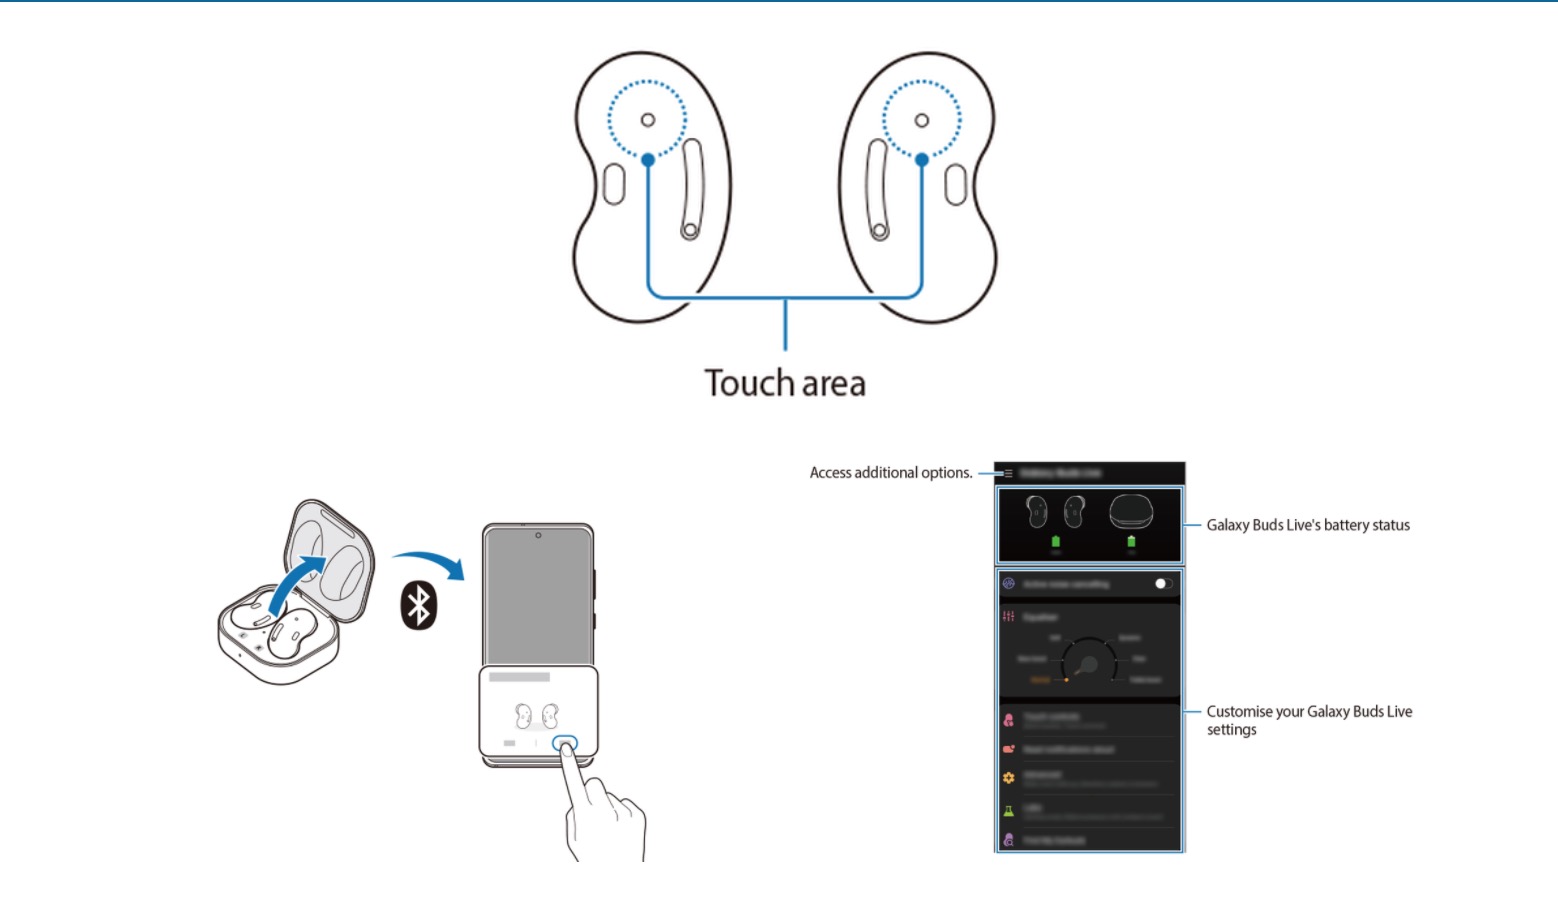 Samsung Galaxy Buds Live's user manual leaked with more details